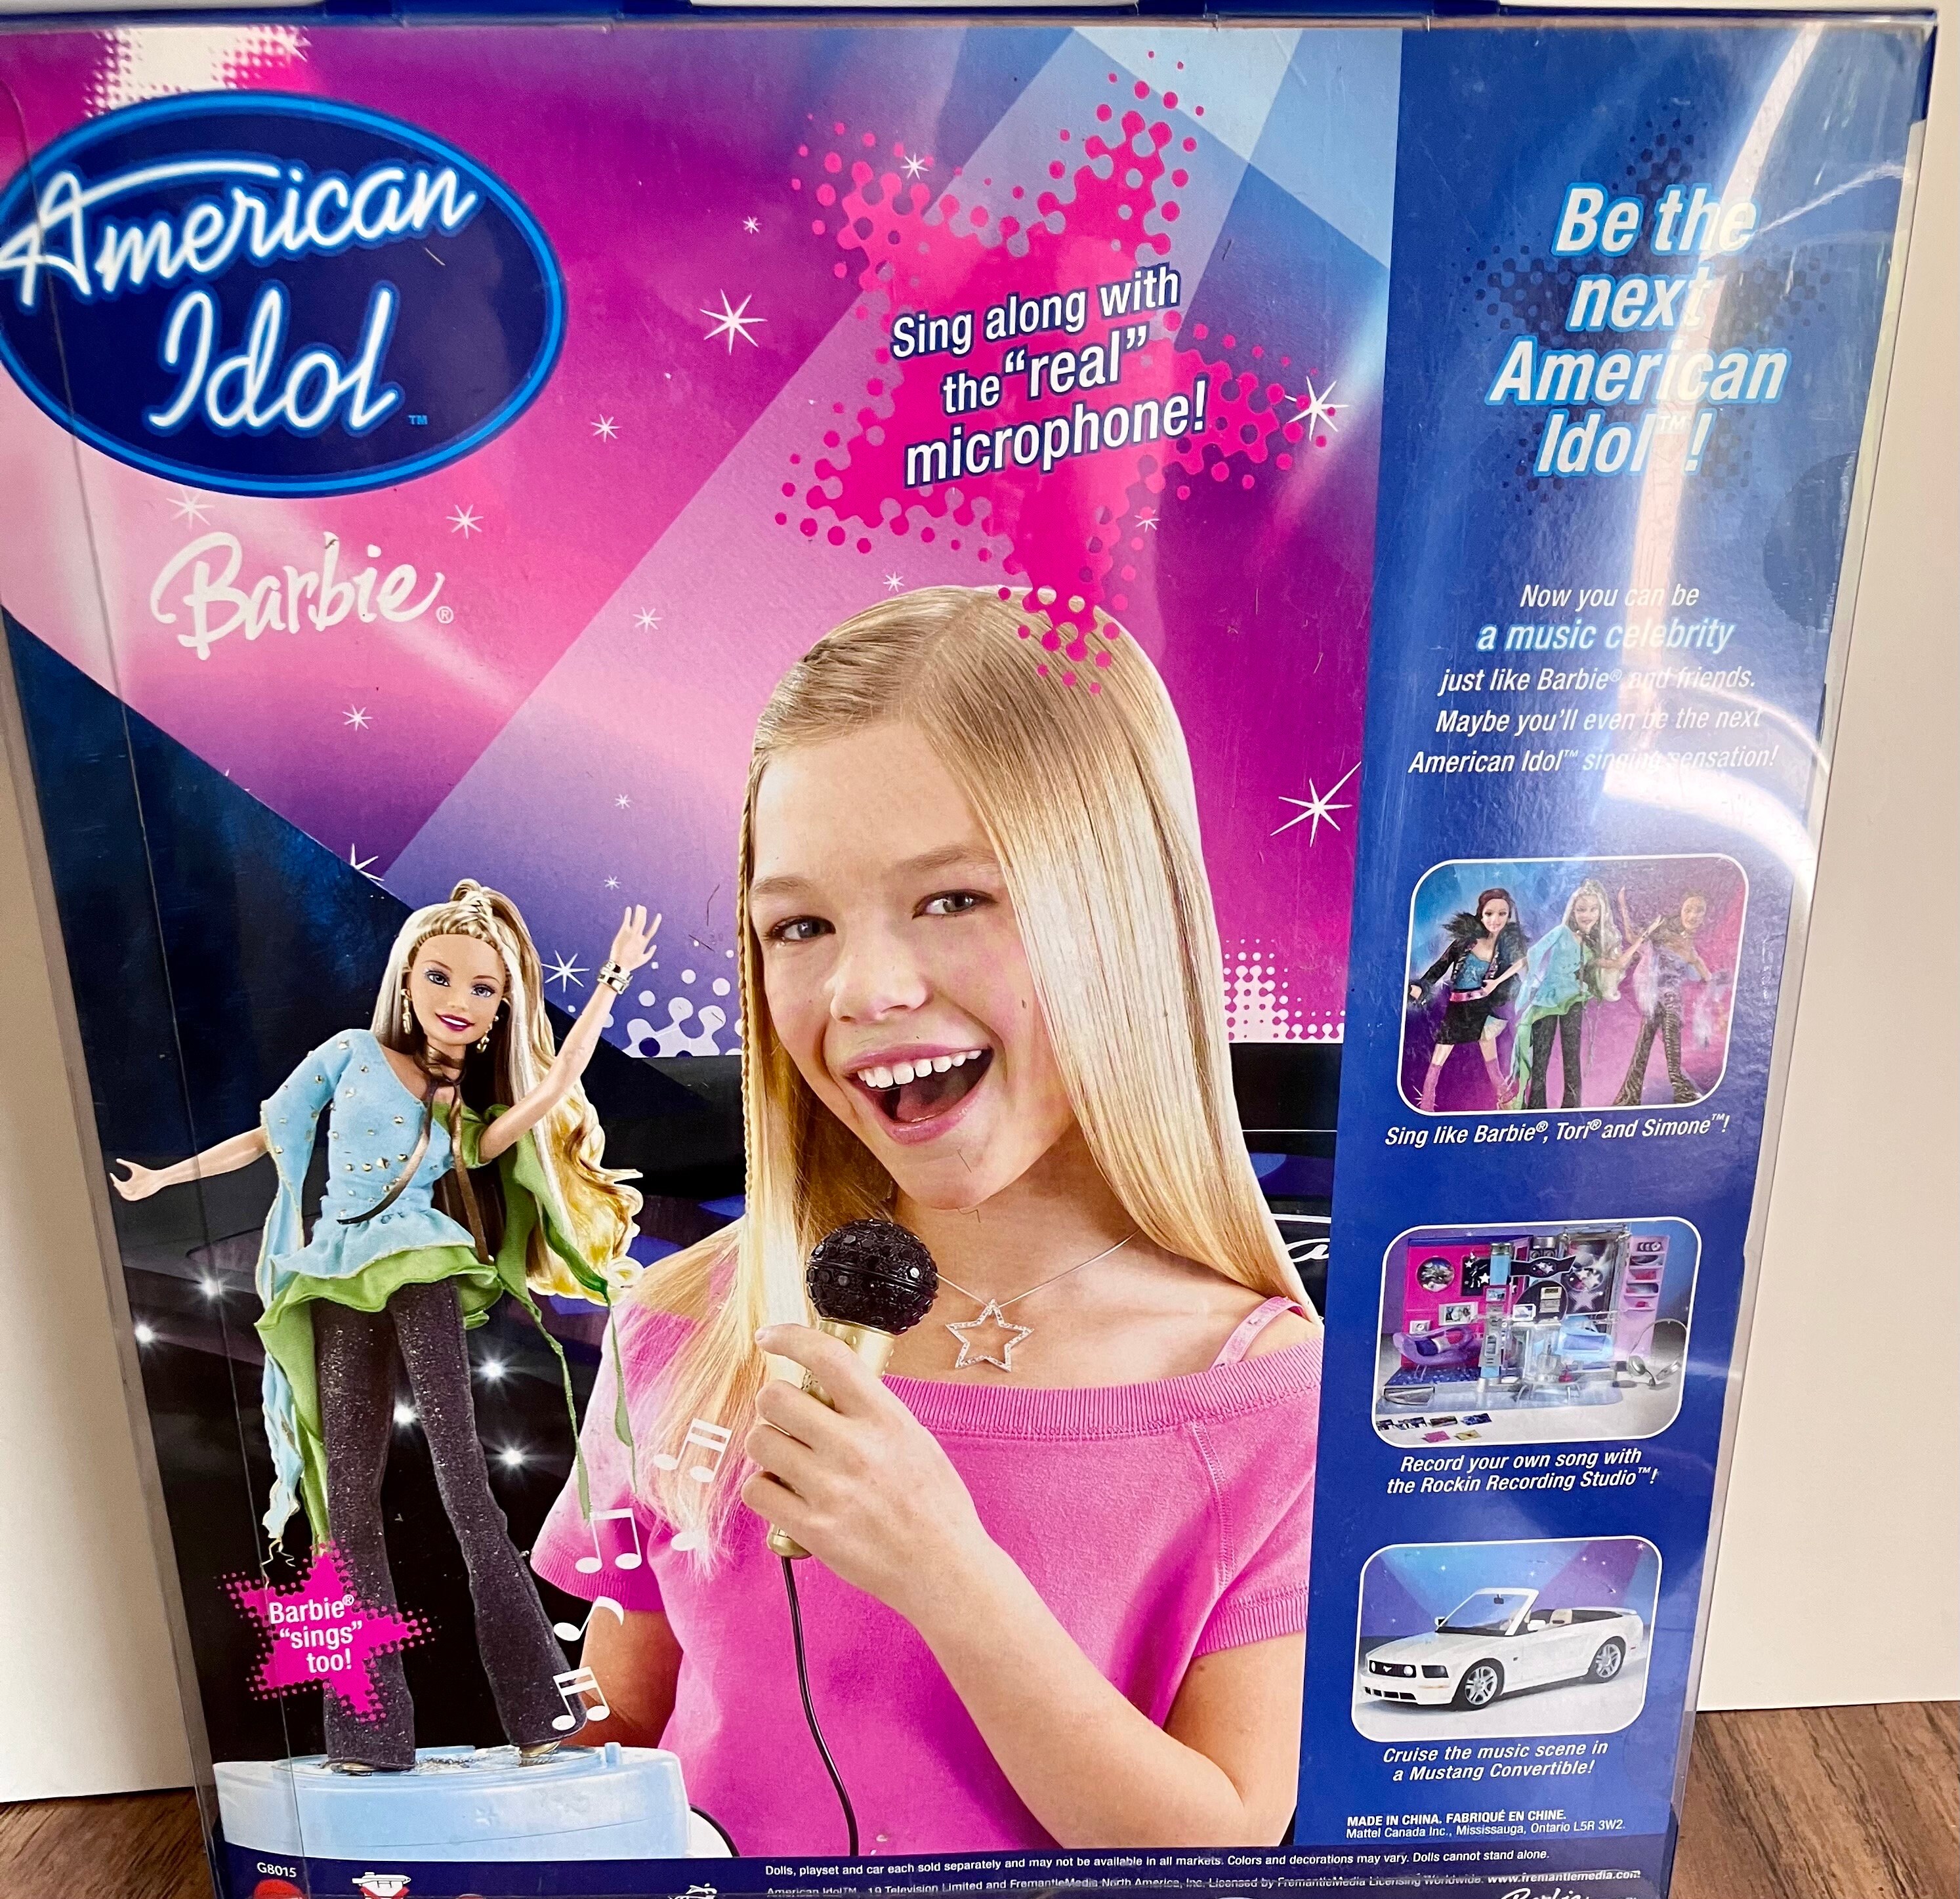 American Idol Barbie Doll With Microphone for Kids